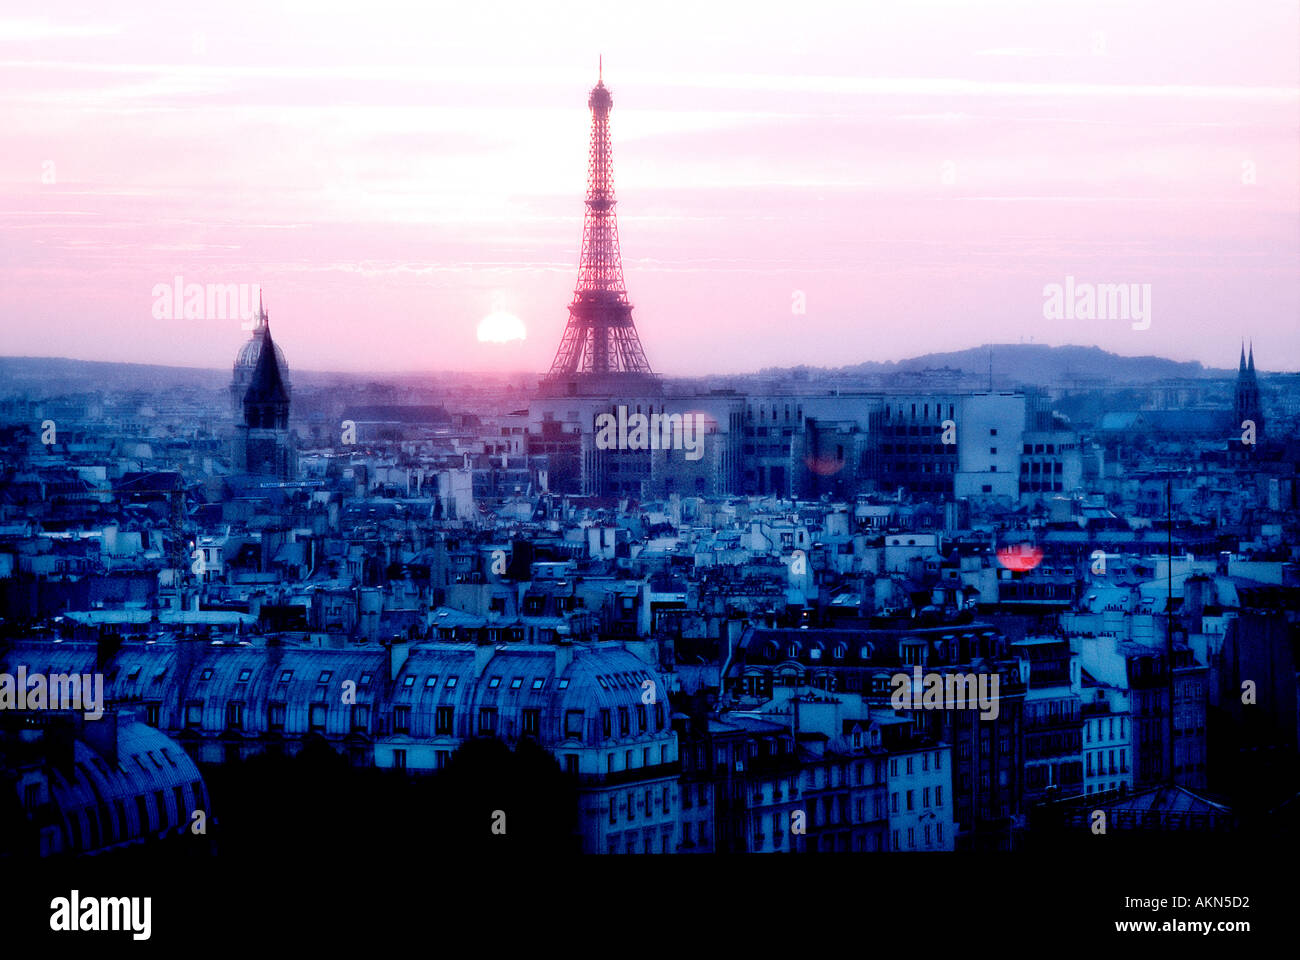 Paris France, Overview Of City Looking towards Eiffel Tower at Sunset Travel "Cityscape at night" paris rooftops Stock Photo